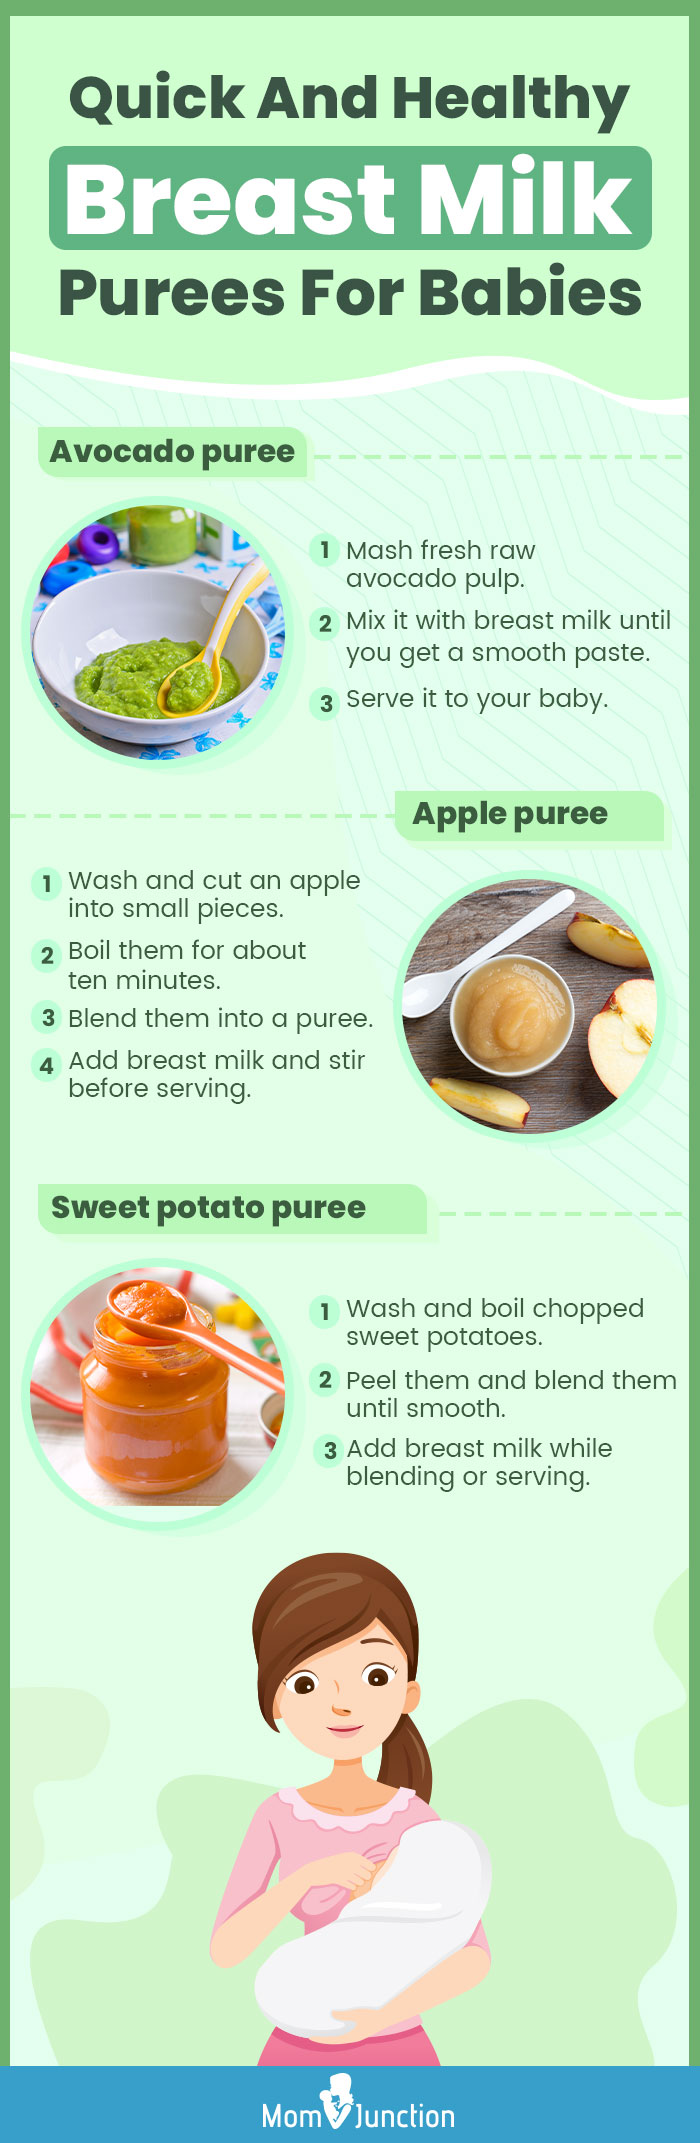 purees with breast milk for babies (infographic)